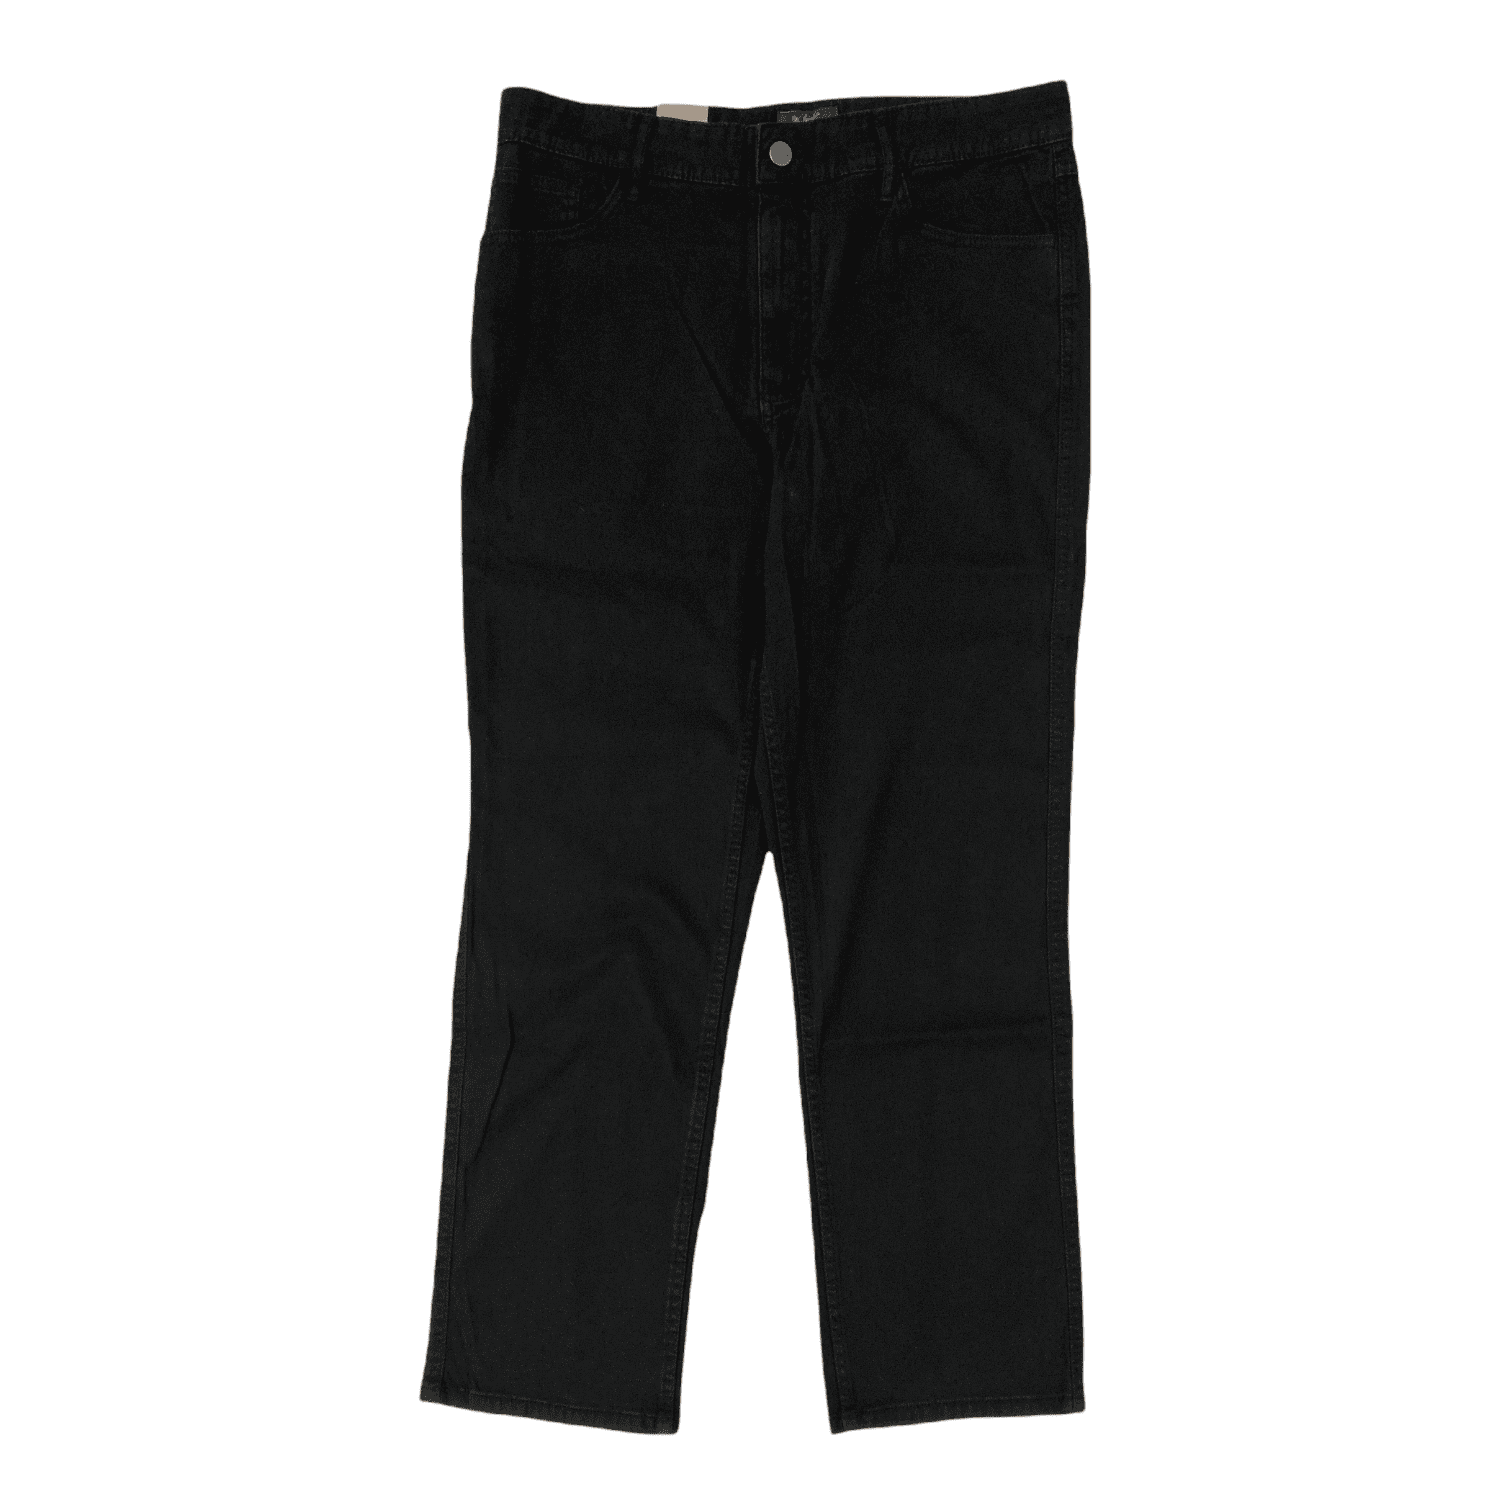 Woolrich Men's Straight Fit Stretch Fabric 5 Pocket Utility Pant ...